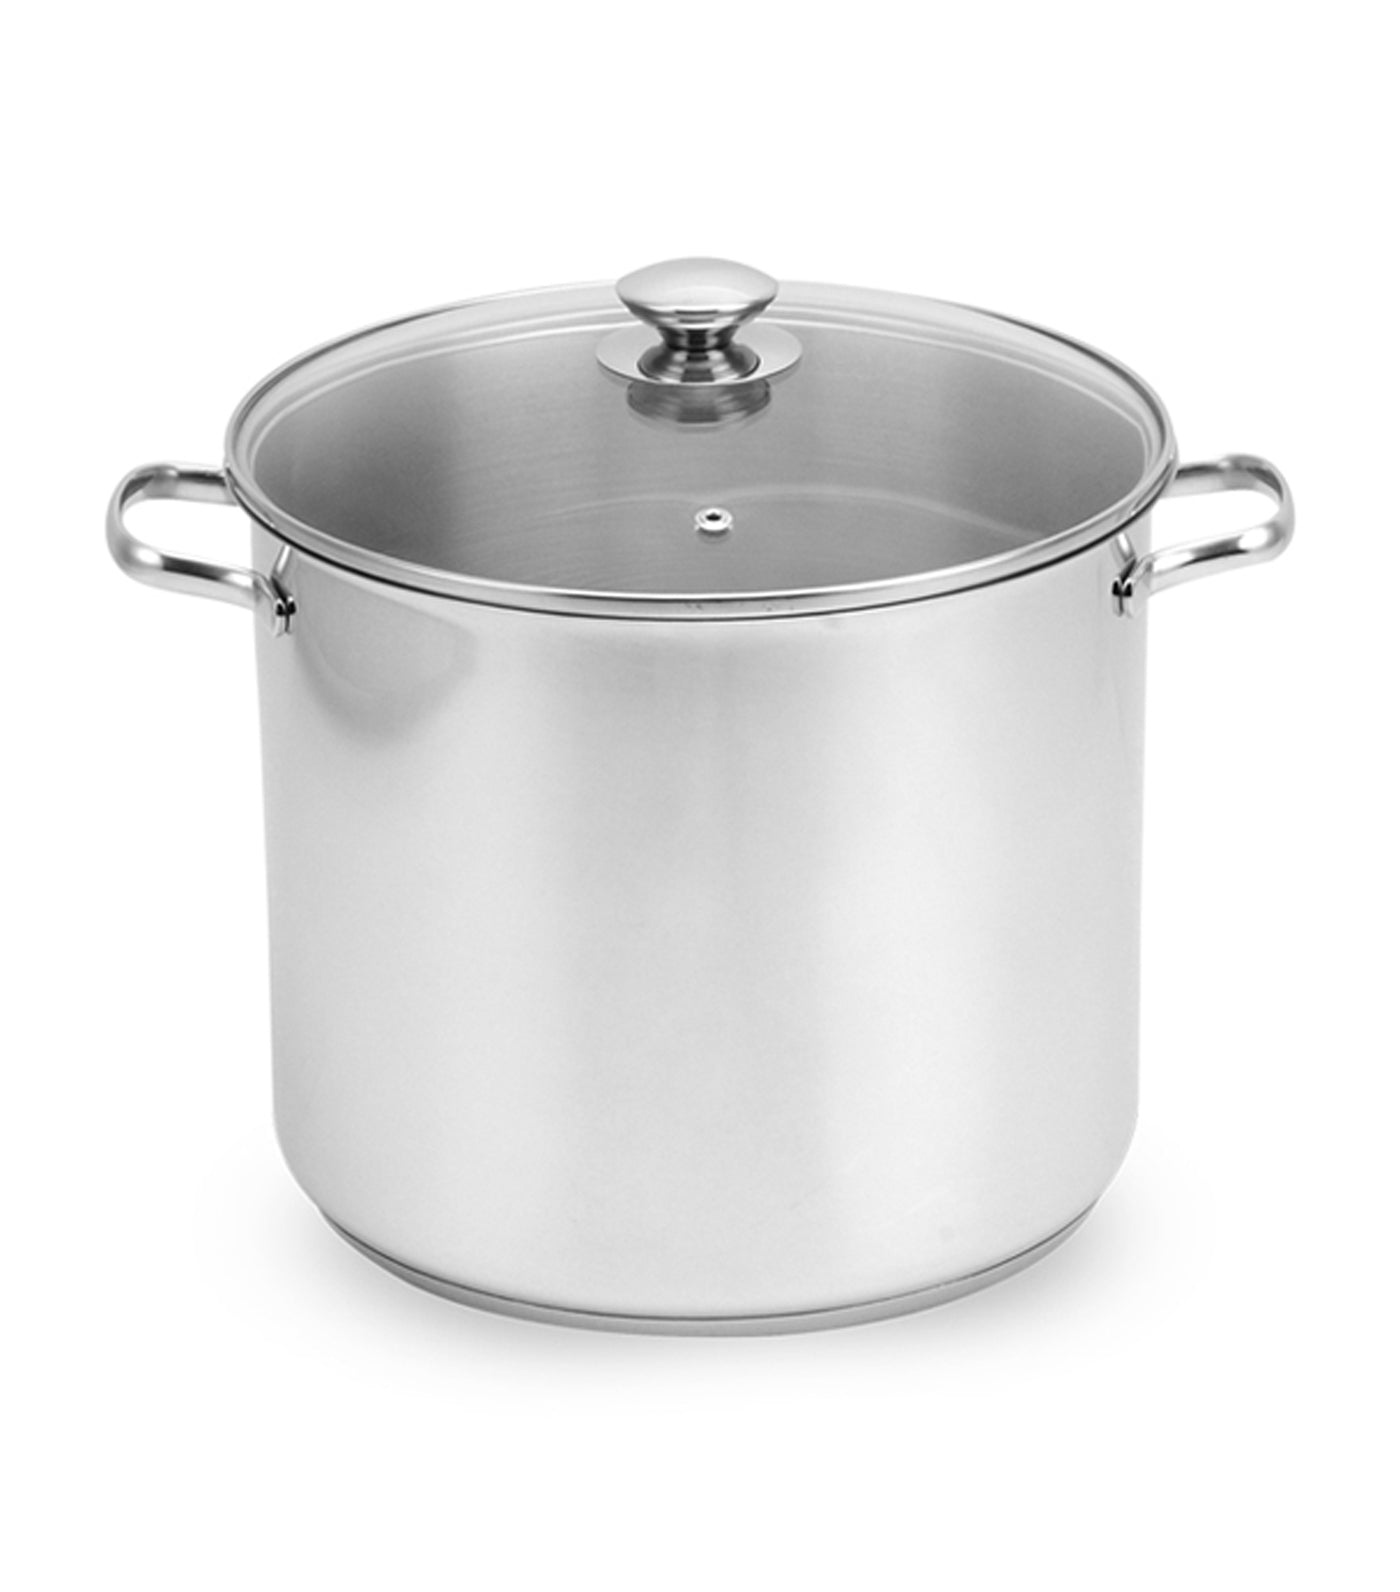 lifestyle silver stainless steel stockpot with glass cover